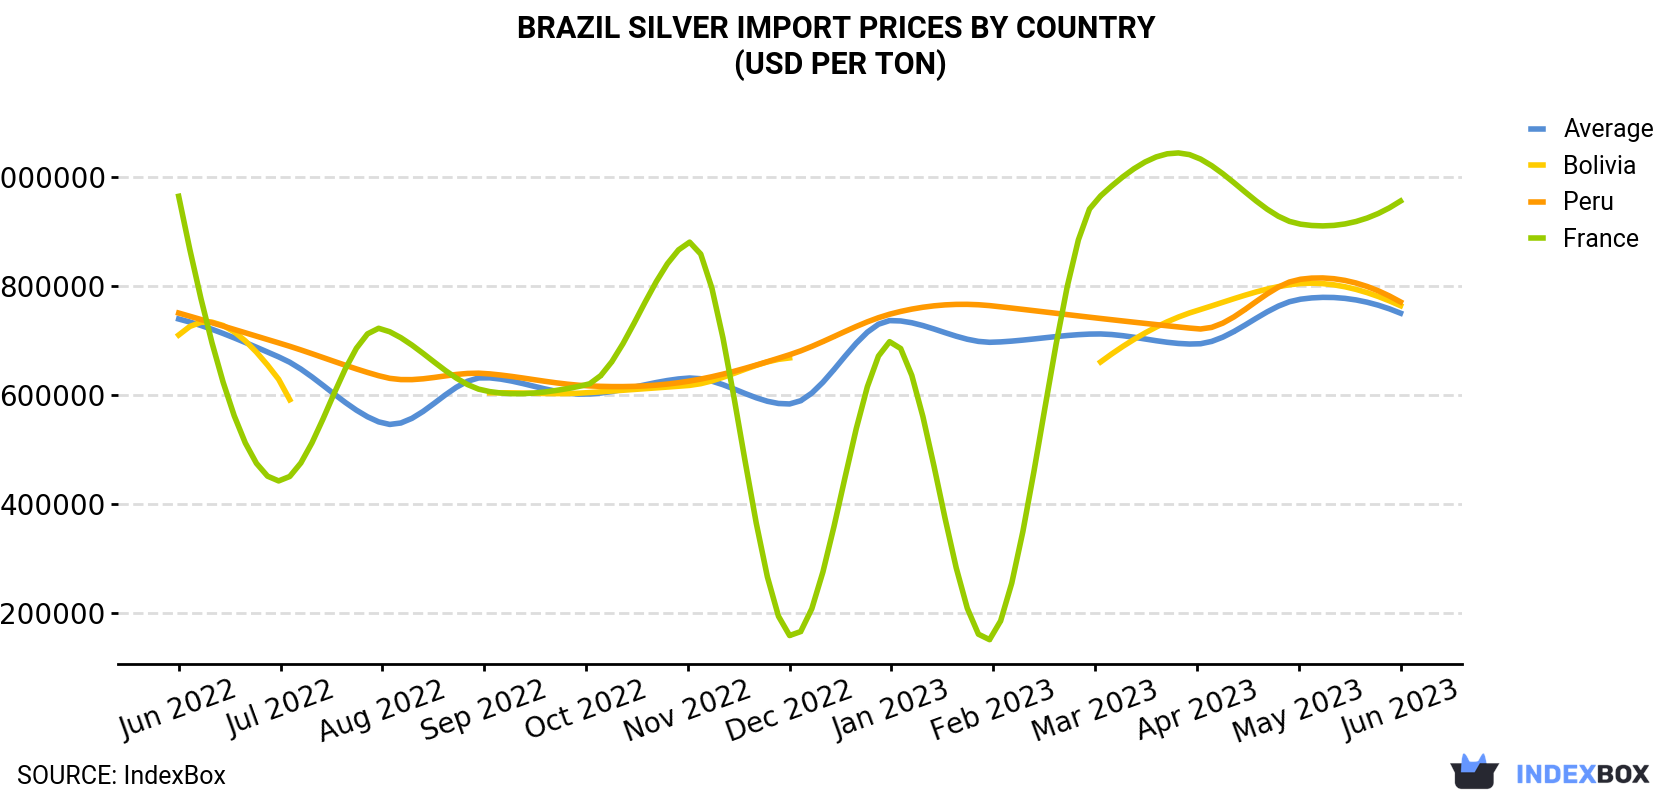 Brazil Silver Import Prices By Country (USD Per Ton)